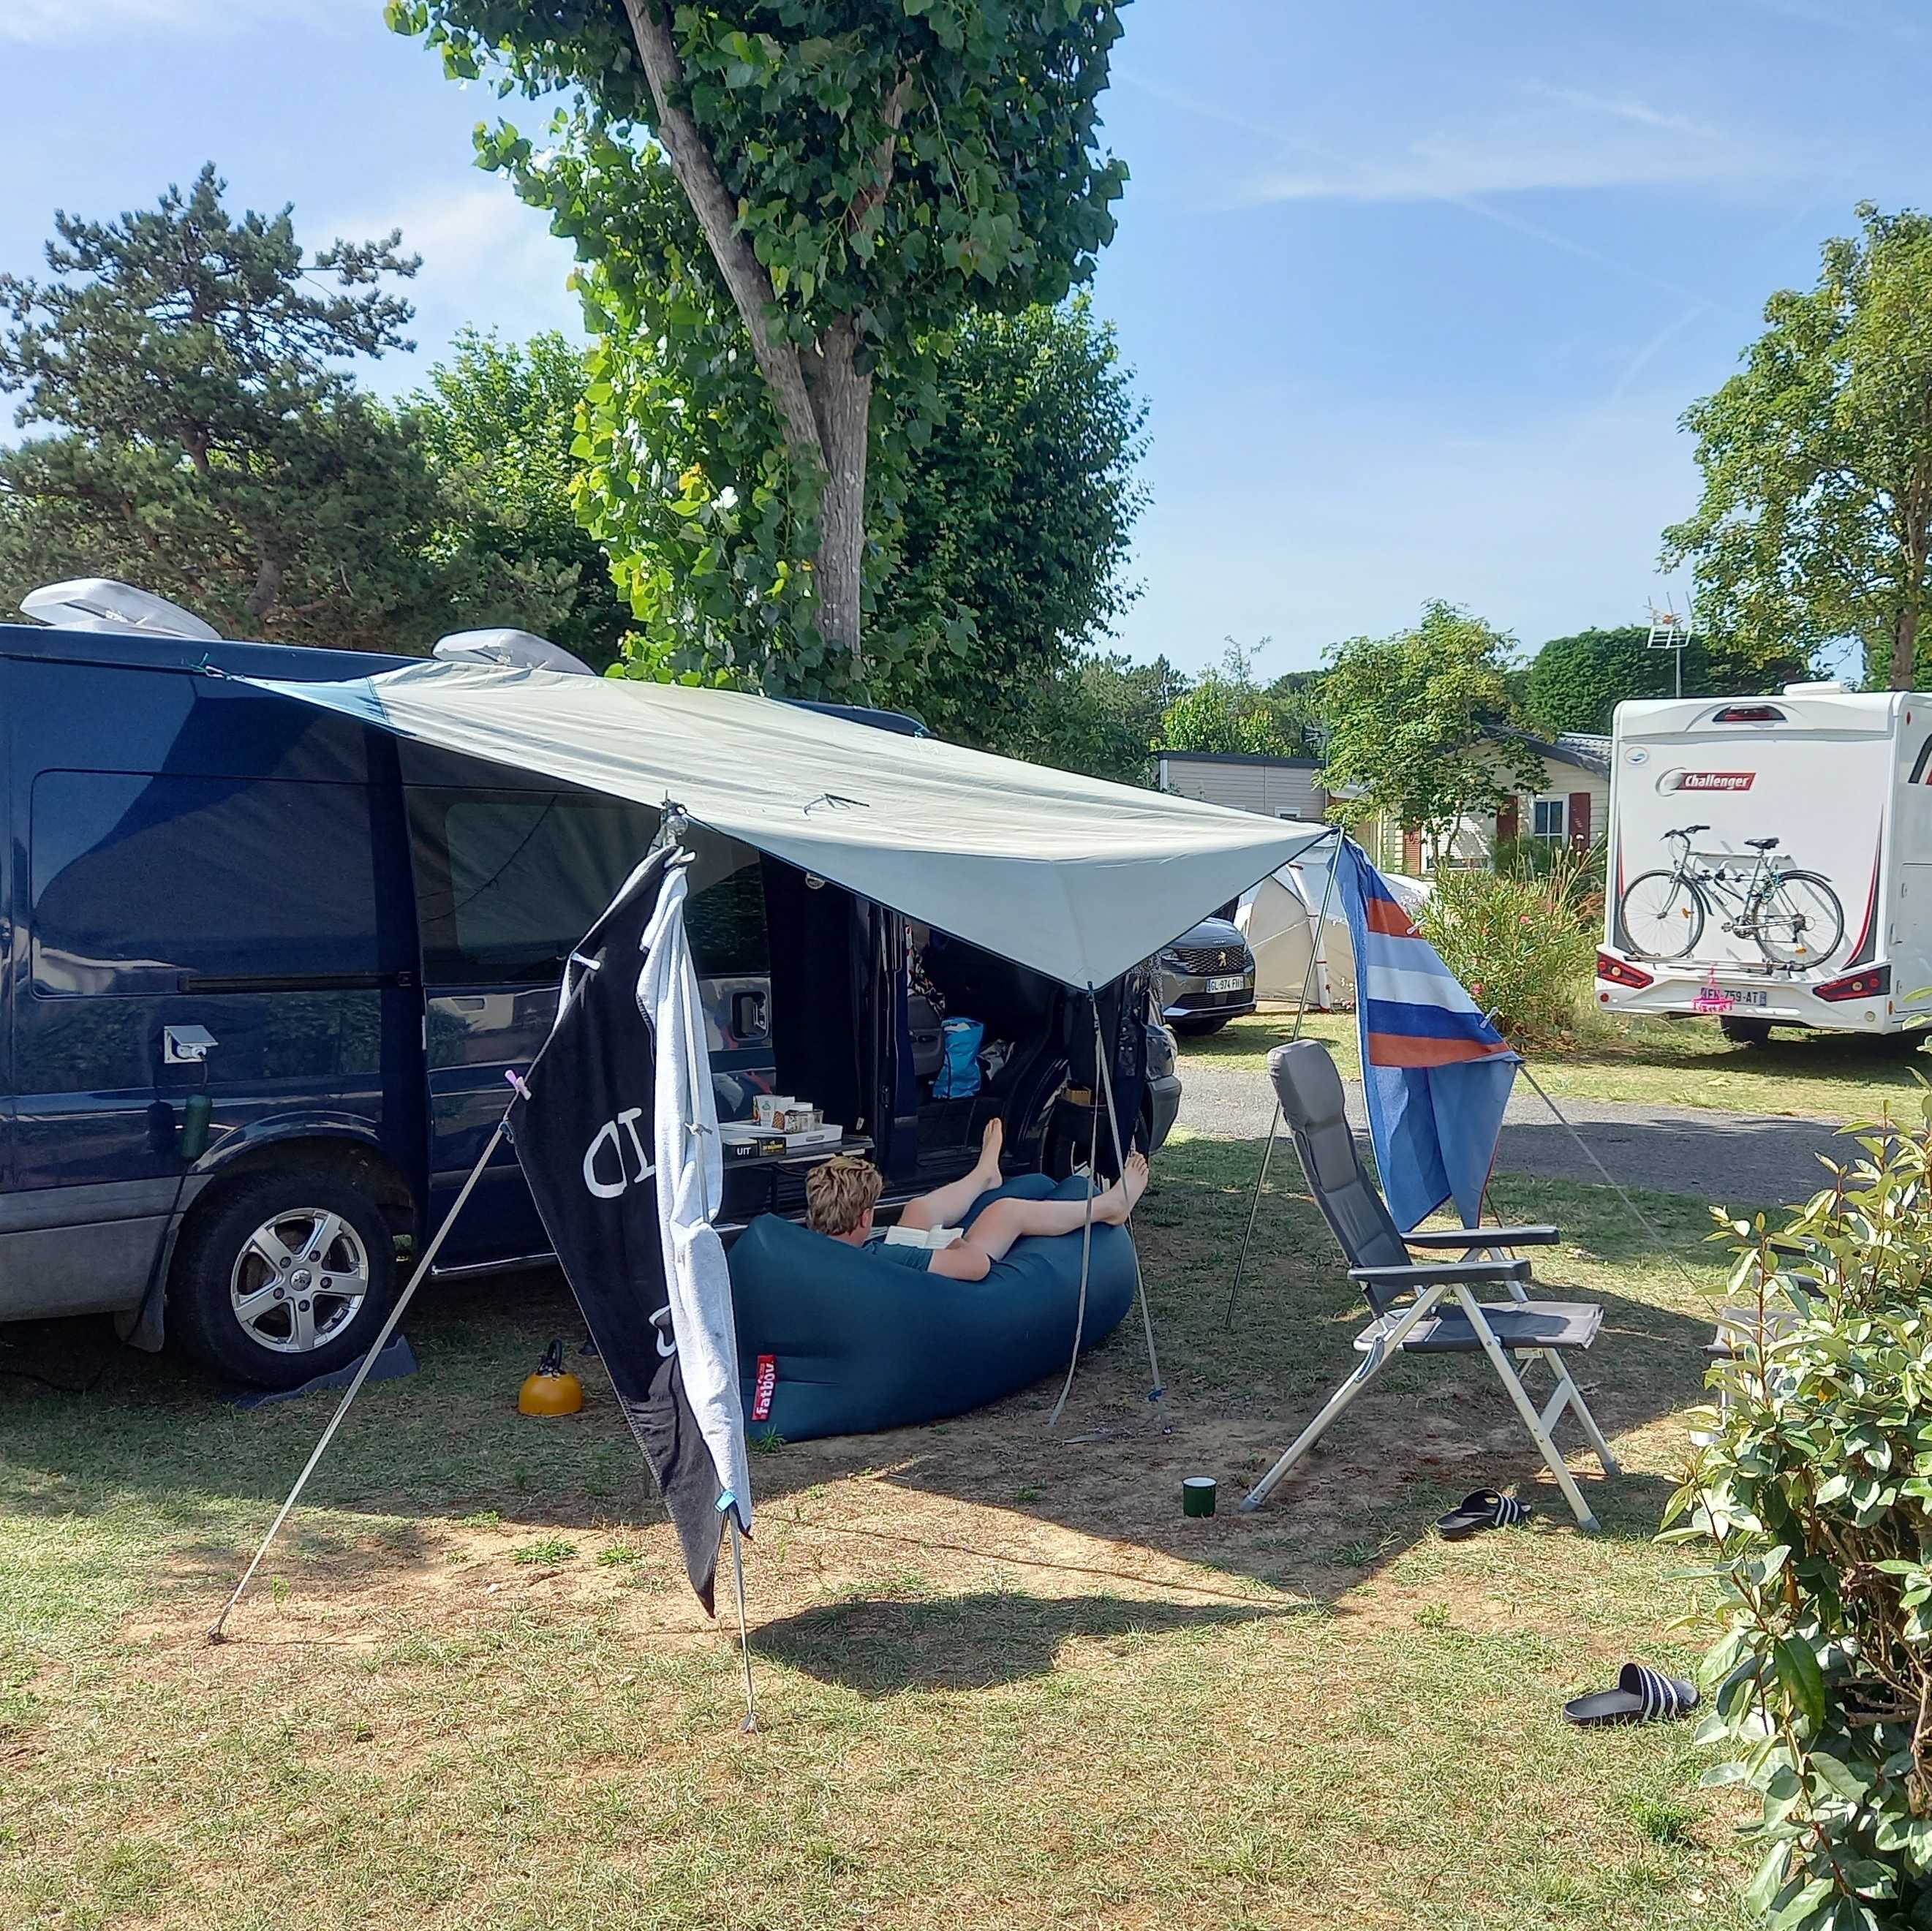 Pitch tent or trailer tent + 7.50 m  (water, electricity, 2 people and 1 vehicle) 1/2 Ppl. 1/2 Ppl.